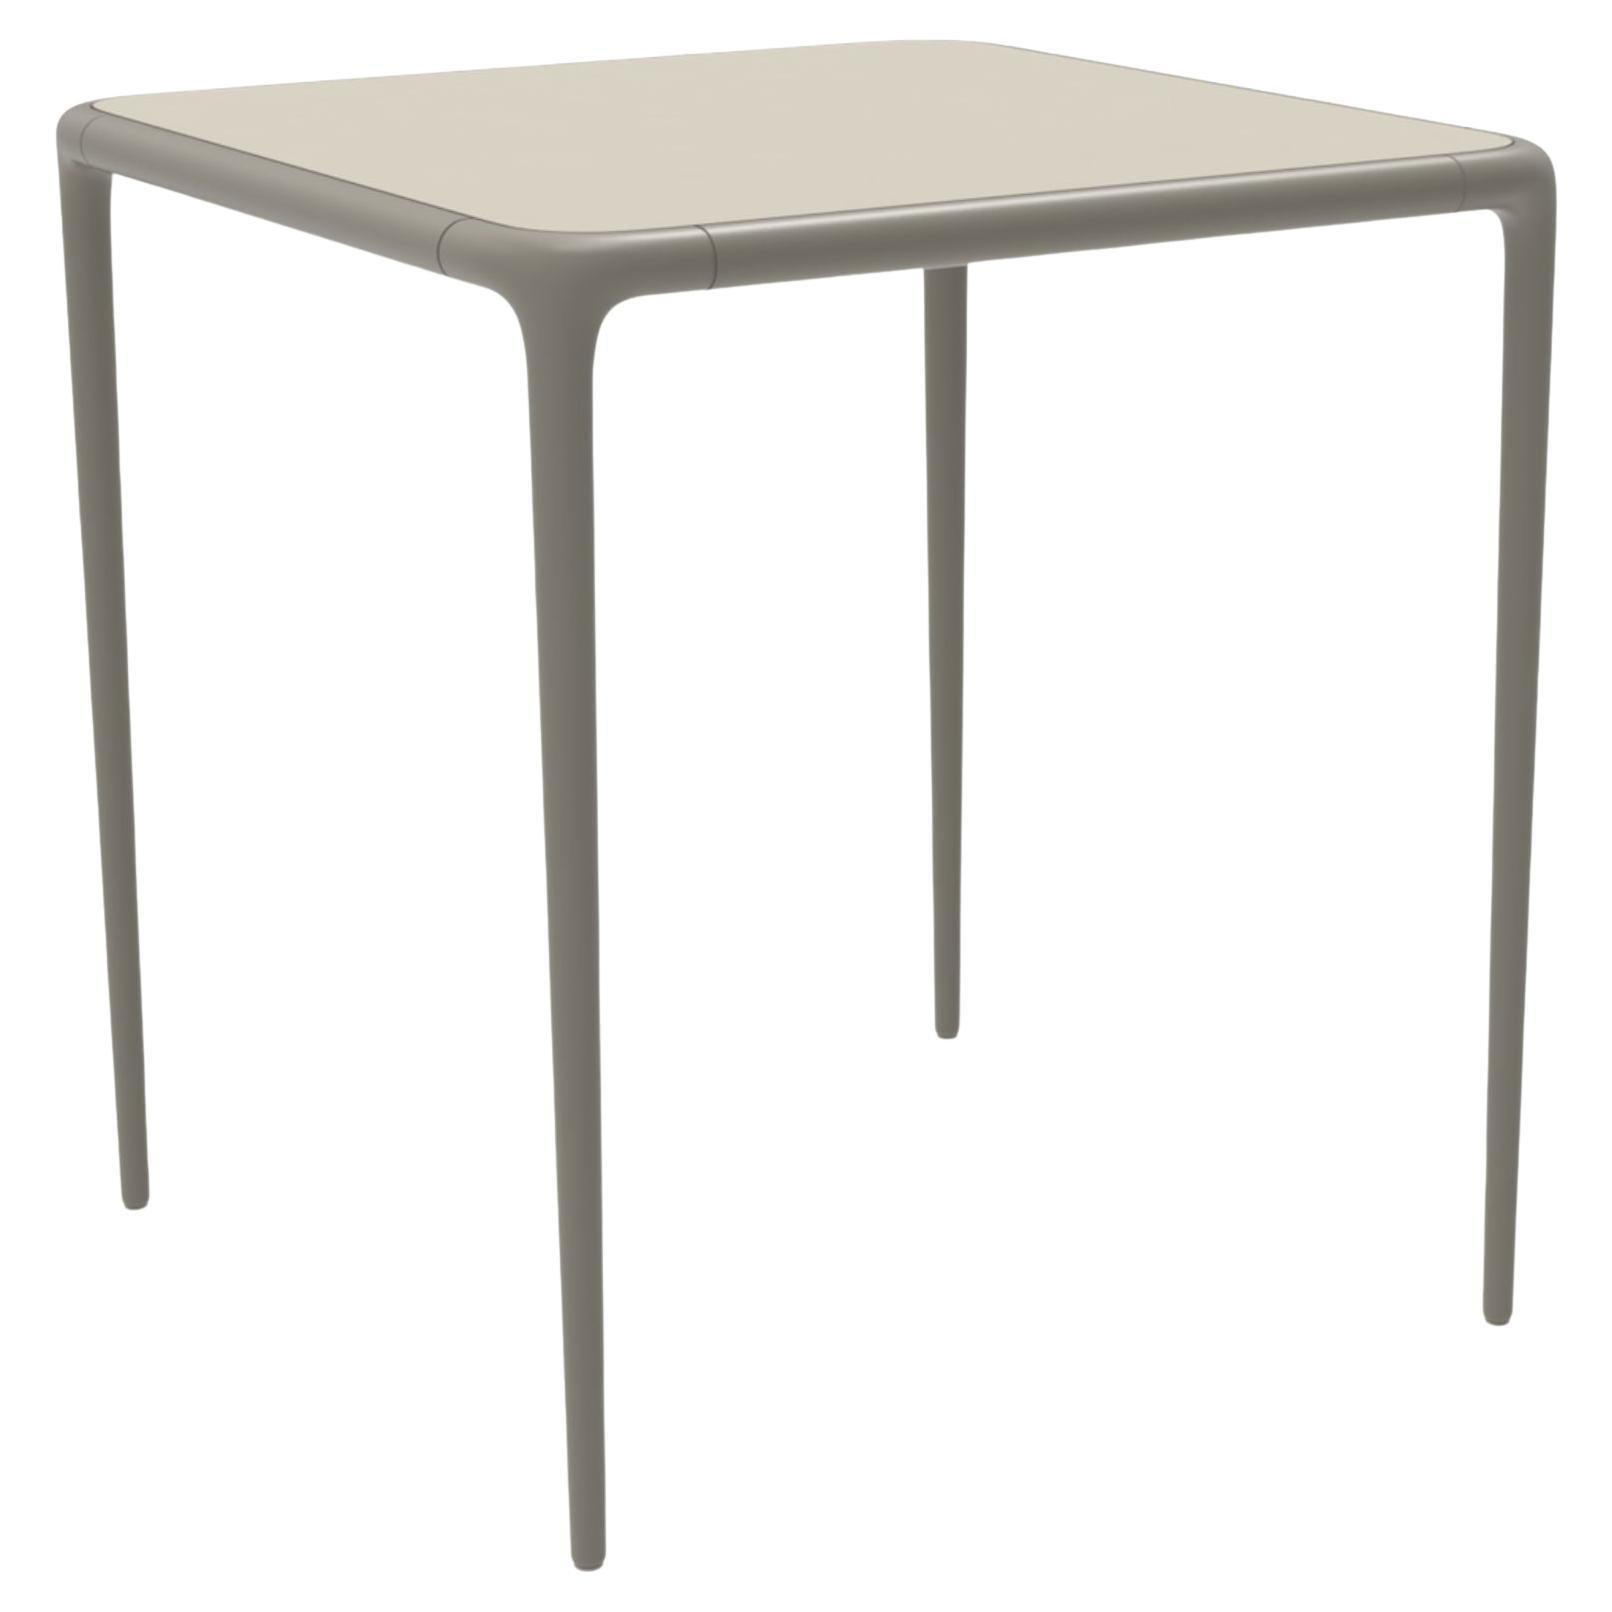 Xaloc Cream Glass Top Table 70 by Mowee For Sale